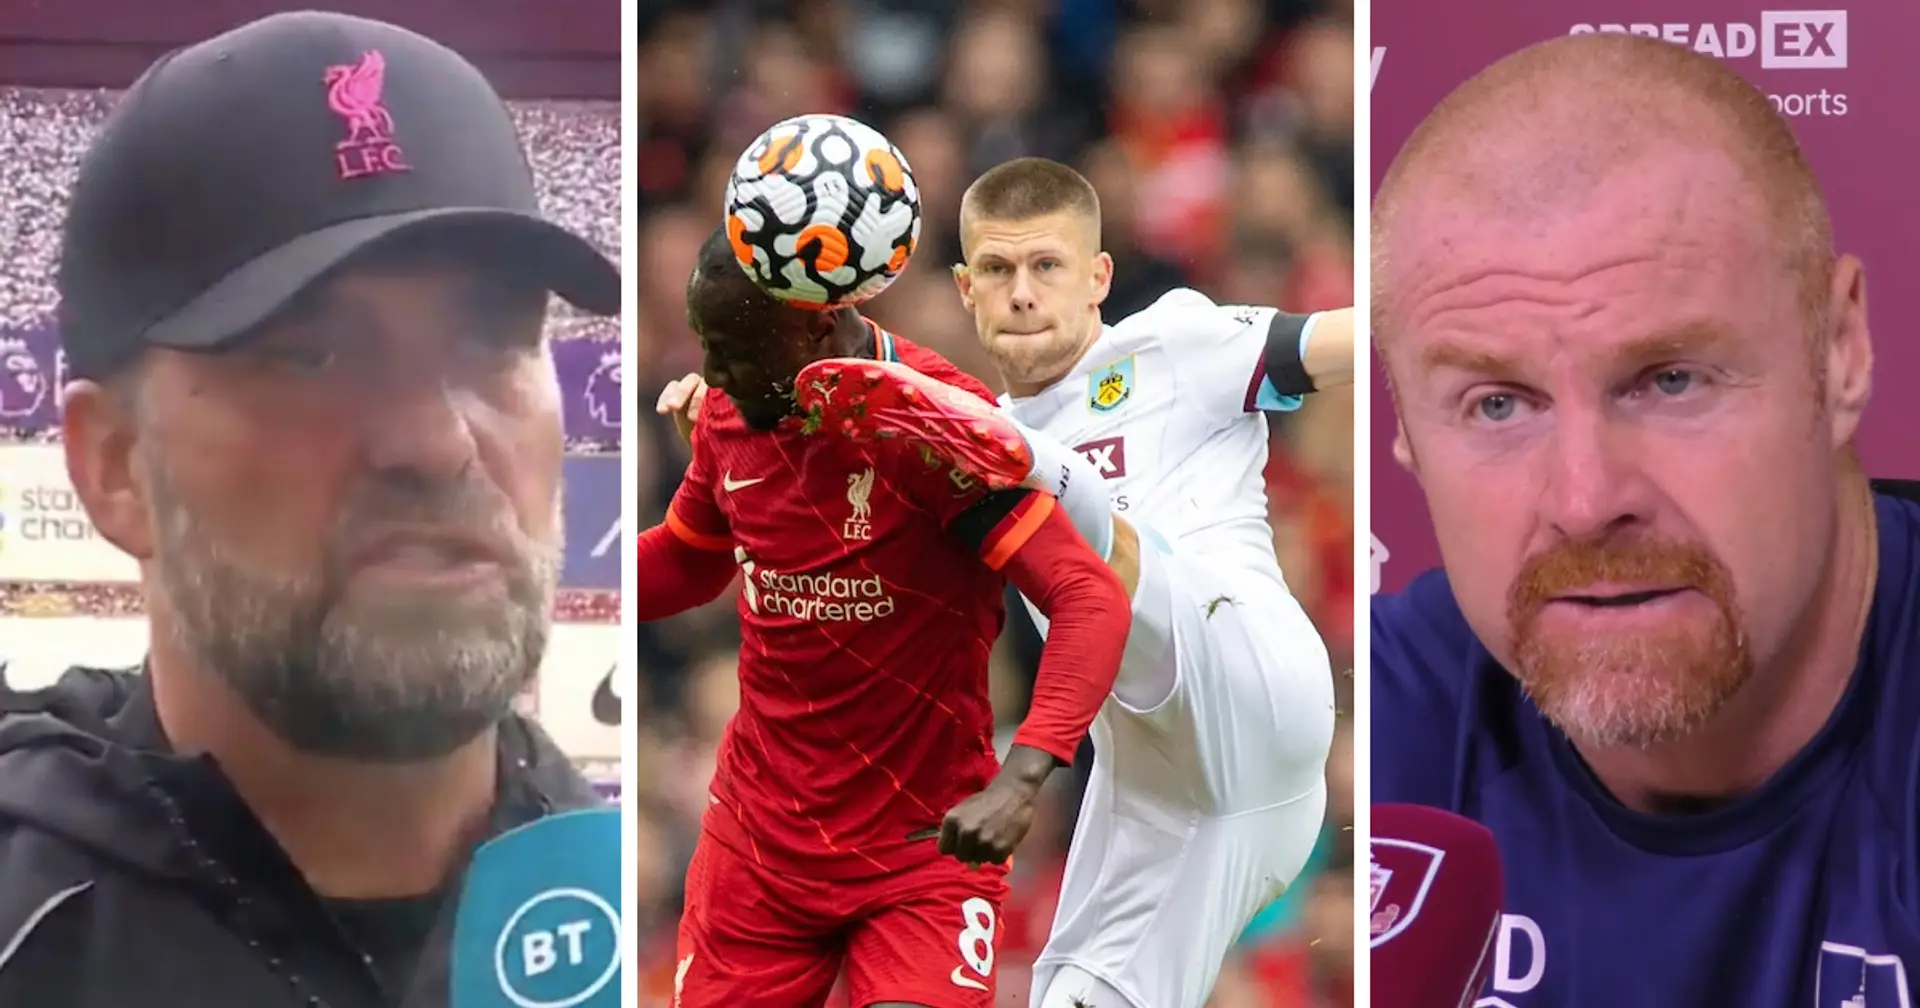 Sean Dyche makes Liverpool history claim to justify Burnley aggressive tactics, responds to Klopp